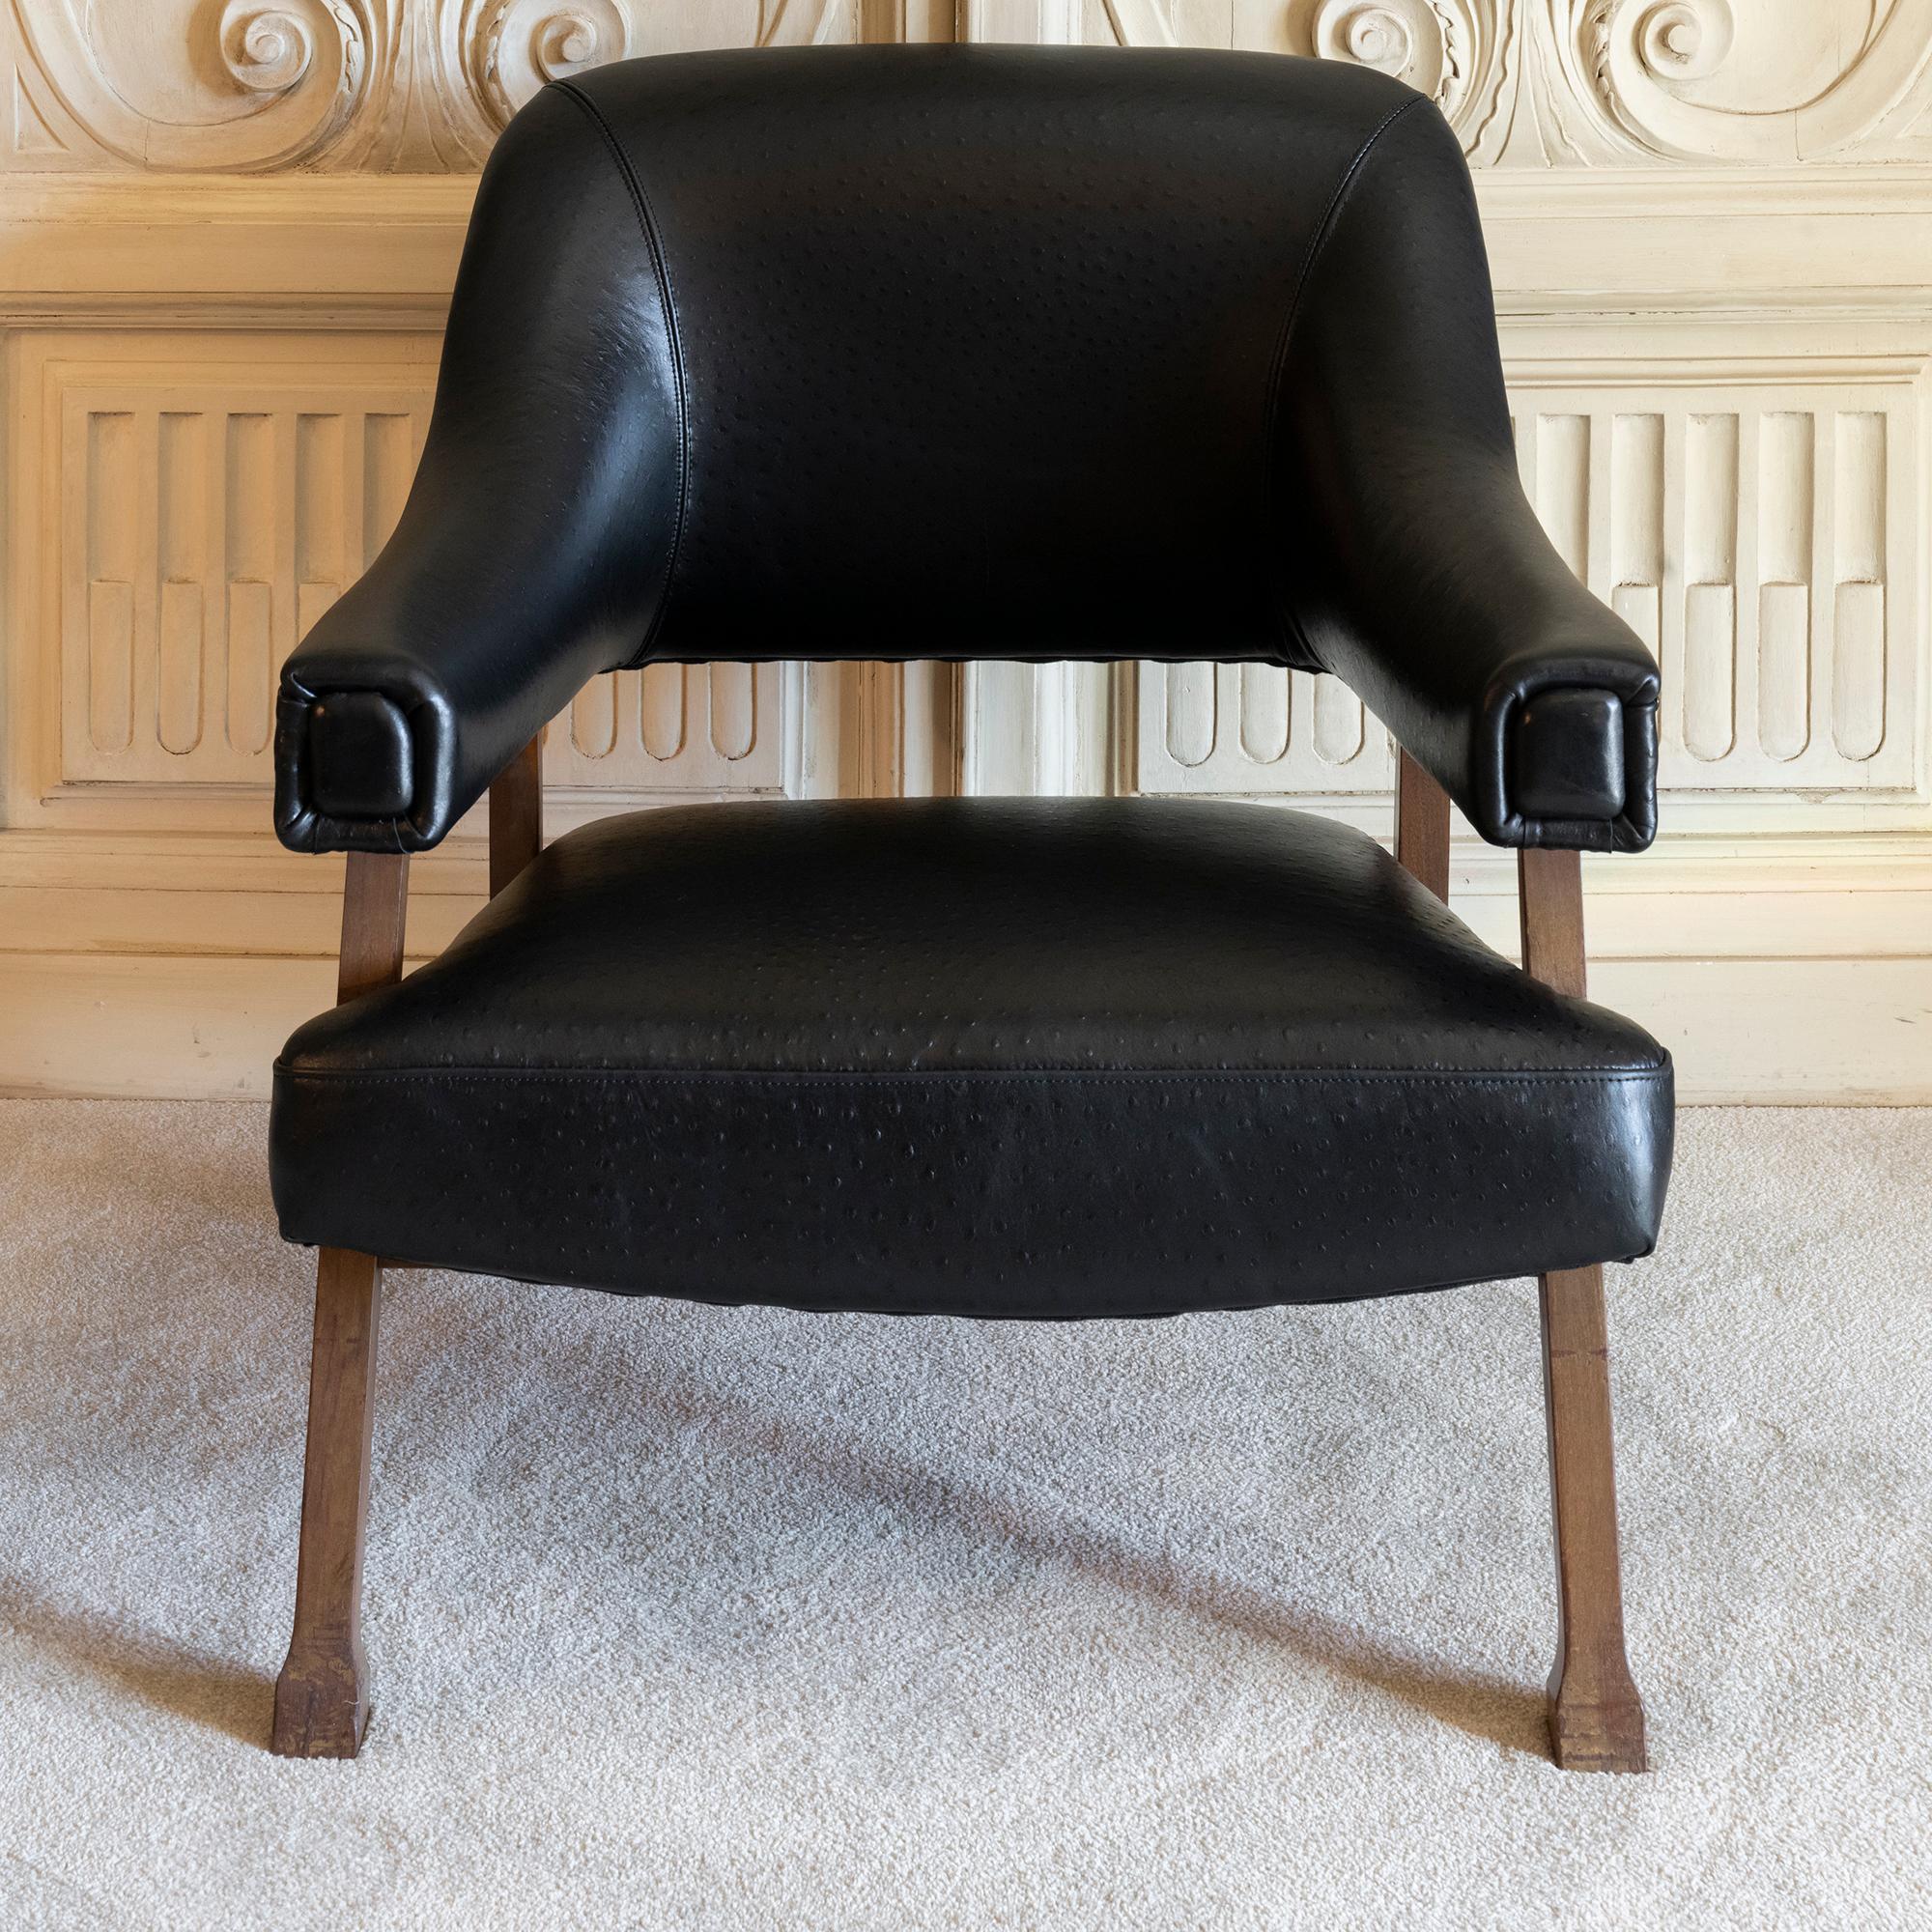 Raffaella Crespi Italian armchair, original walnut structure in perfect condition and vintage patina, new upholstered in Black Leather, Italy 1960s circa.